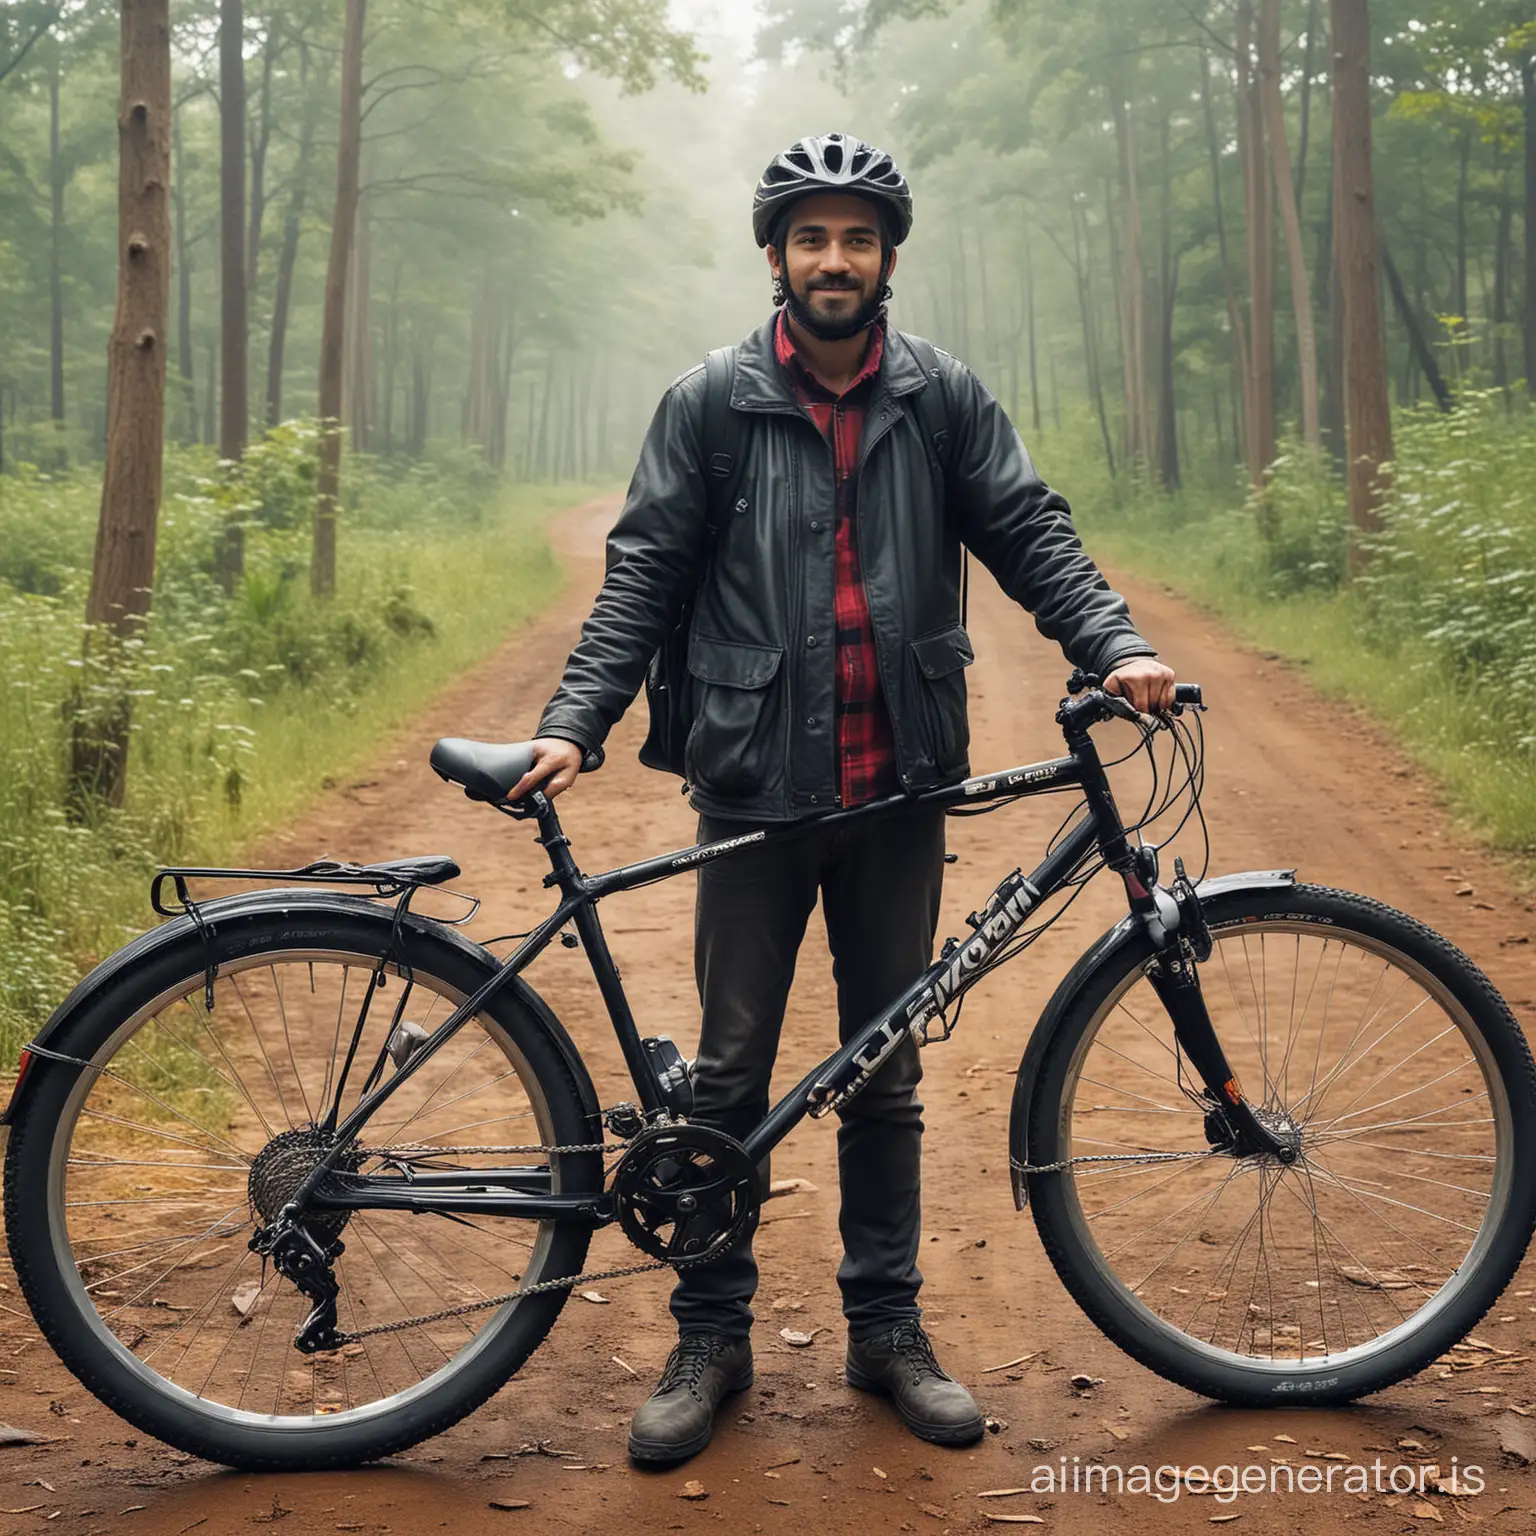 Generate a photo of a bicycle with its owner standing proudly beside it. The owner should exude a sense of adventure and passion for cycling, perhaps wearing biking gear or holding biking accessories. The setting should be outdoors, preferably in a scenic location such as a park, forest trail, or mountainous terrain. The photo should capture the joy and freedom associated with cycling, with the bike and its owner as the focal points of the image.